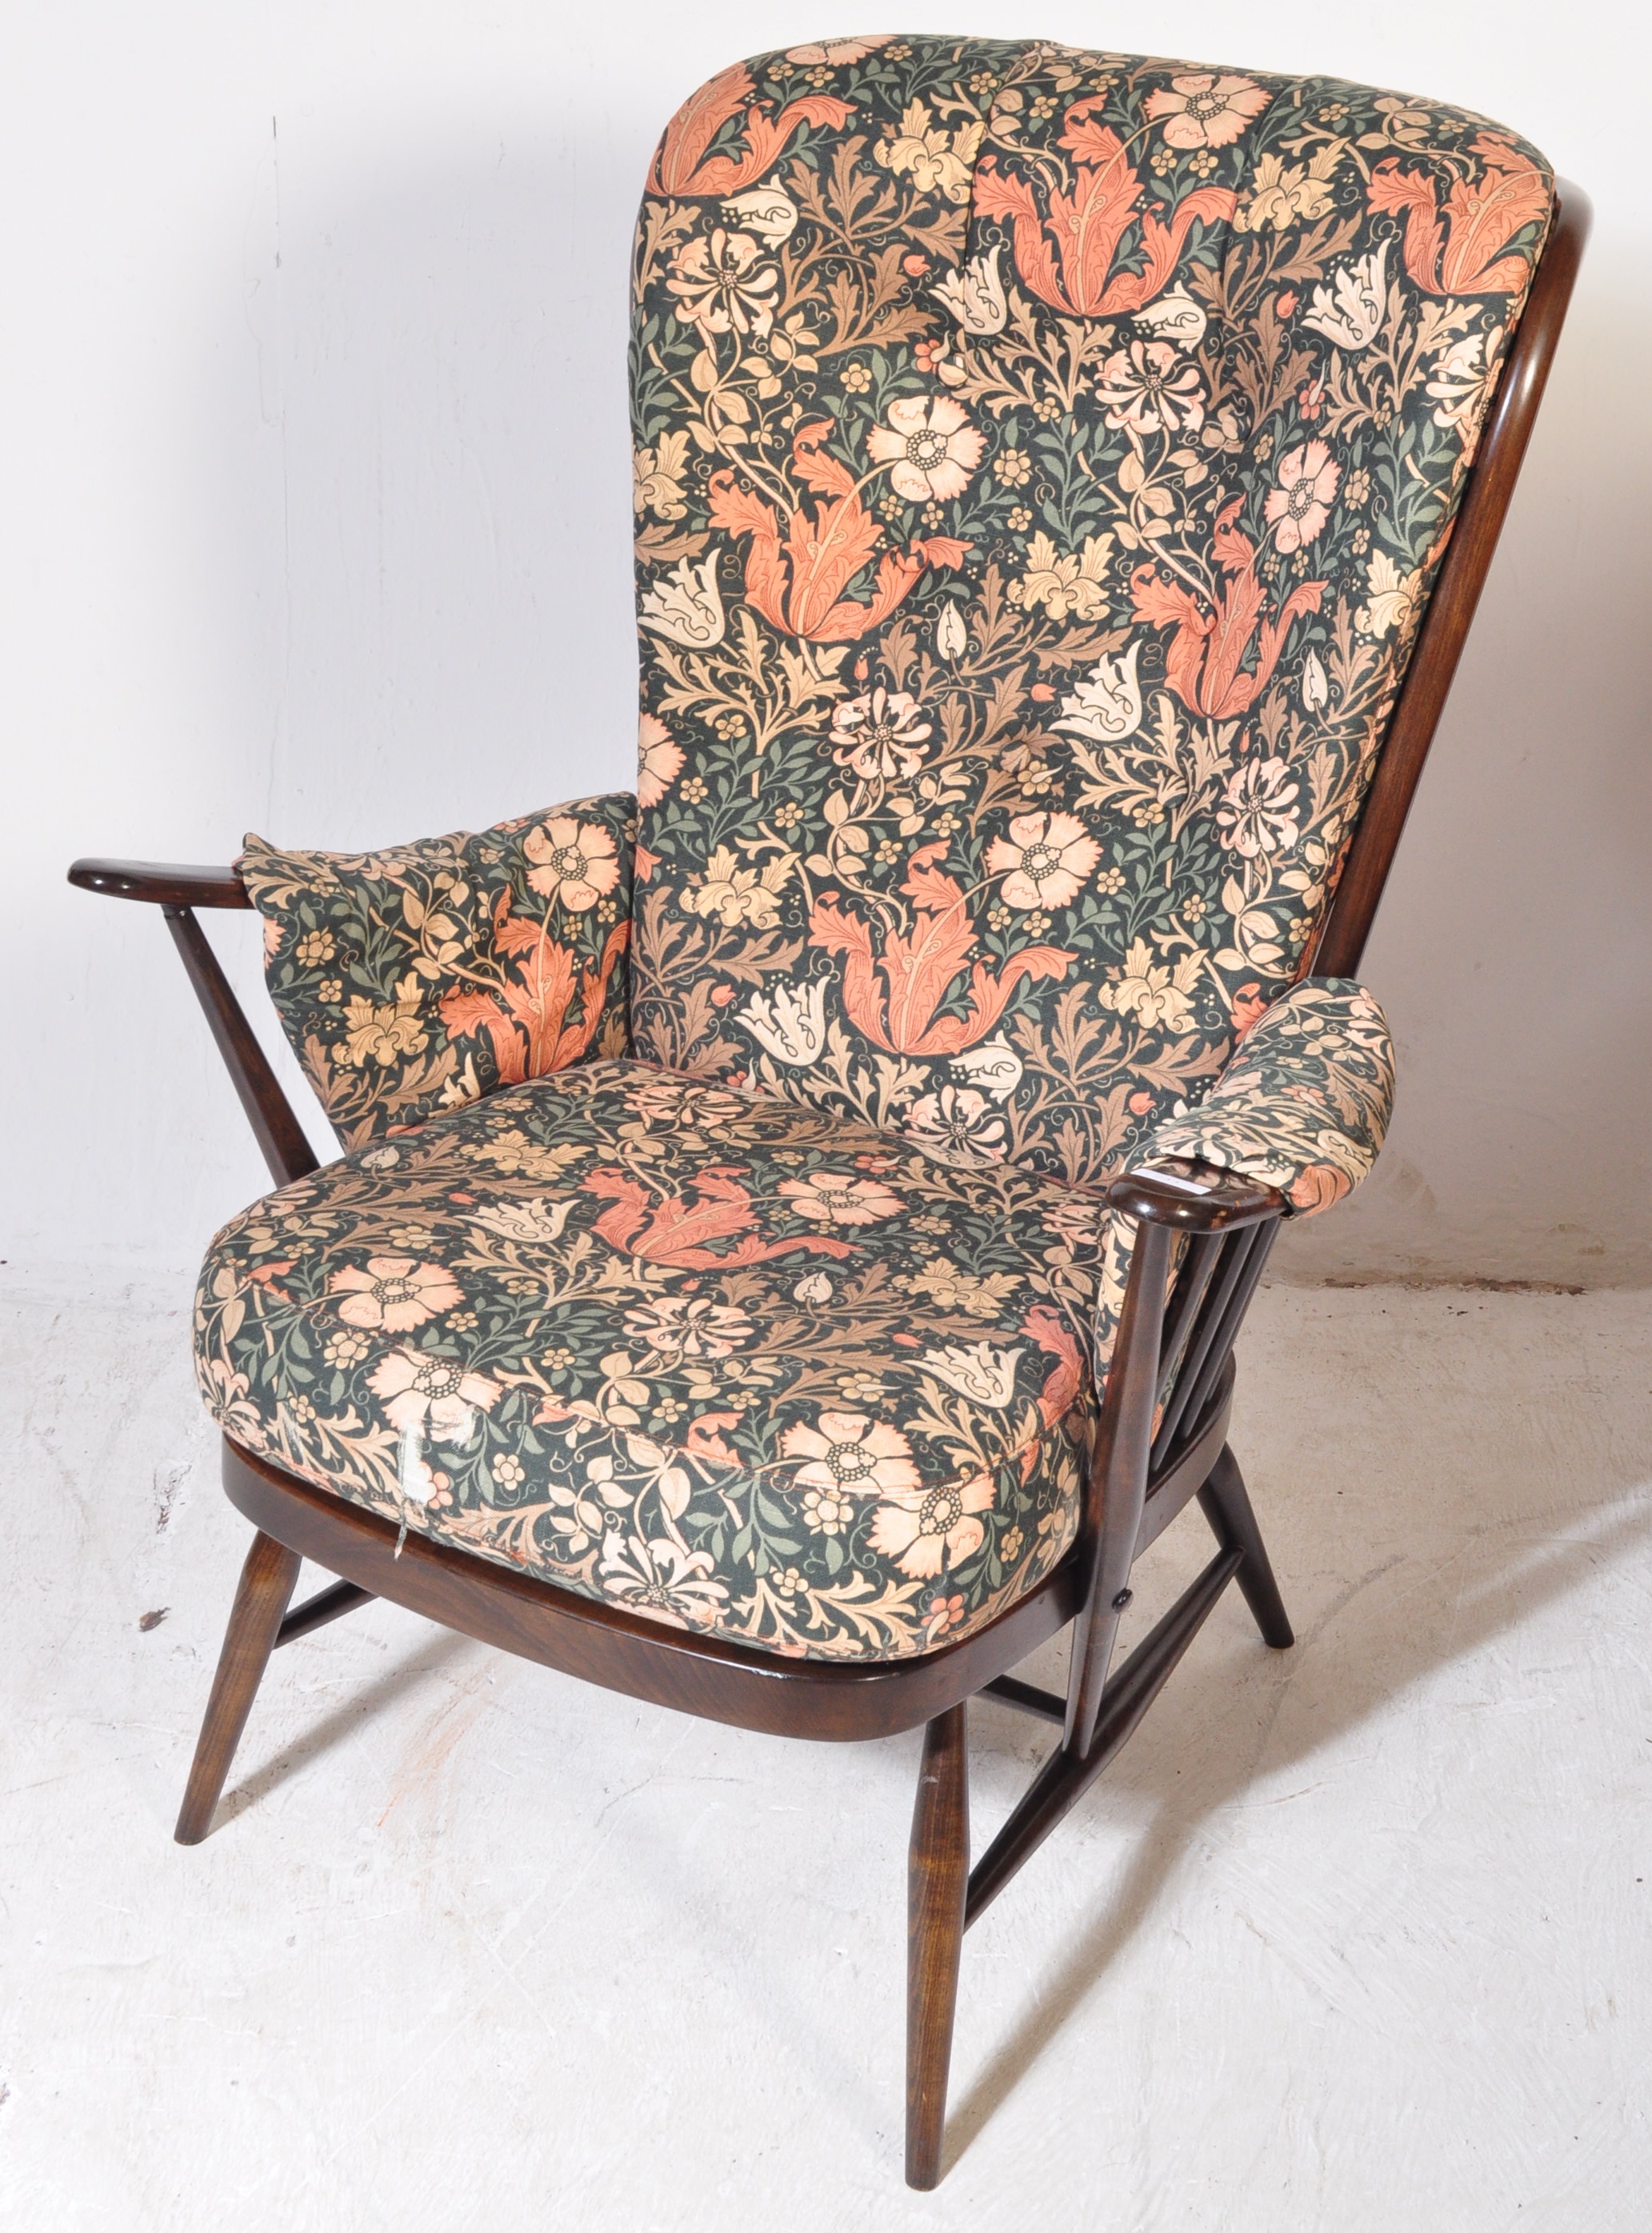 ERCOL - WINDSOR & JUBILEE - RETRO ROCKING CHAIR AND ARMCHAIR - Image 2 of 10